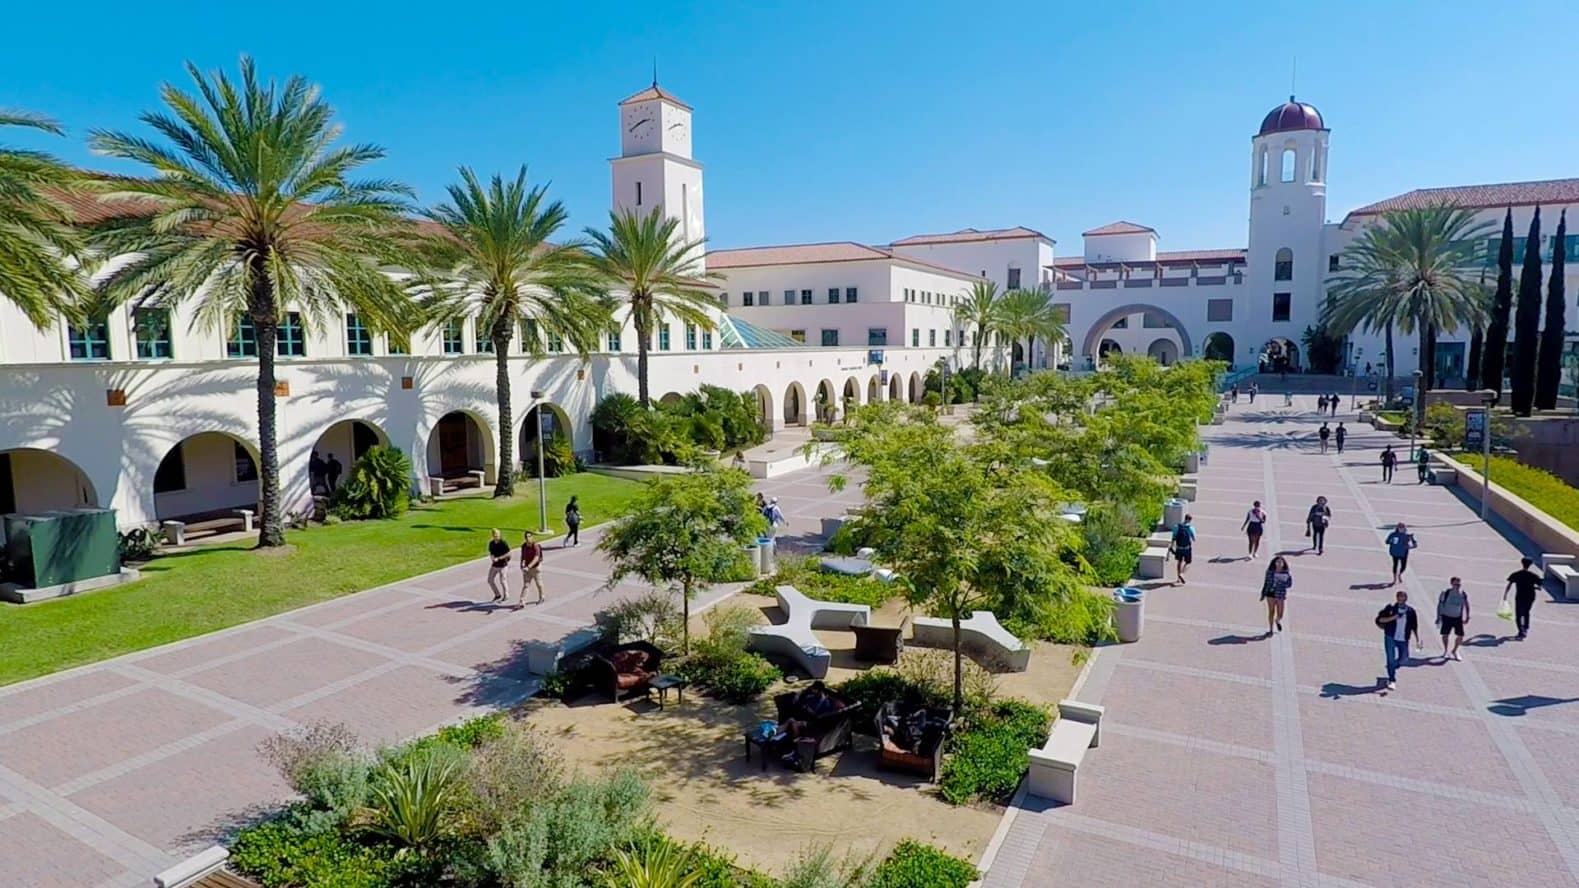 20 Interesting Facts About San Diego State University - Facts.net